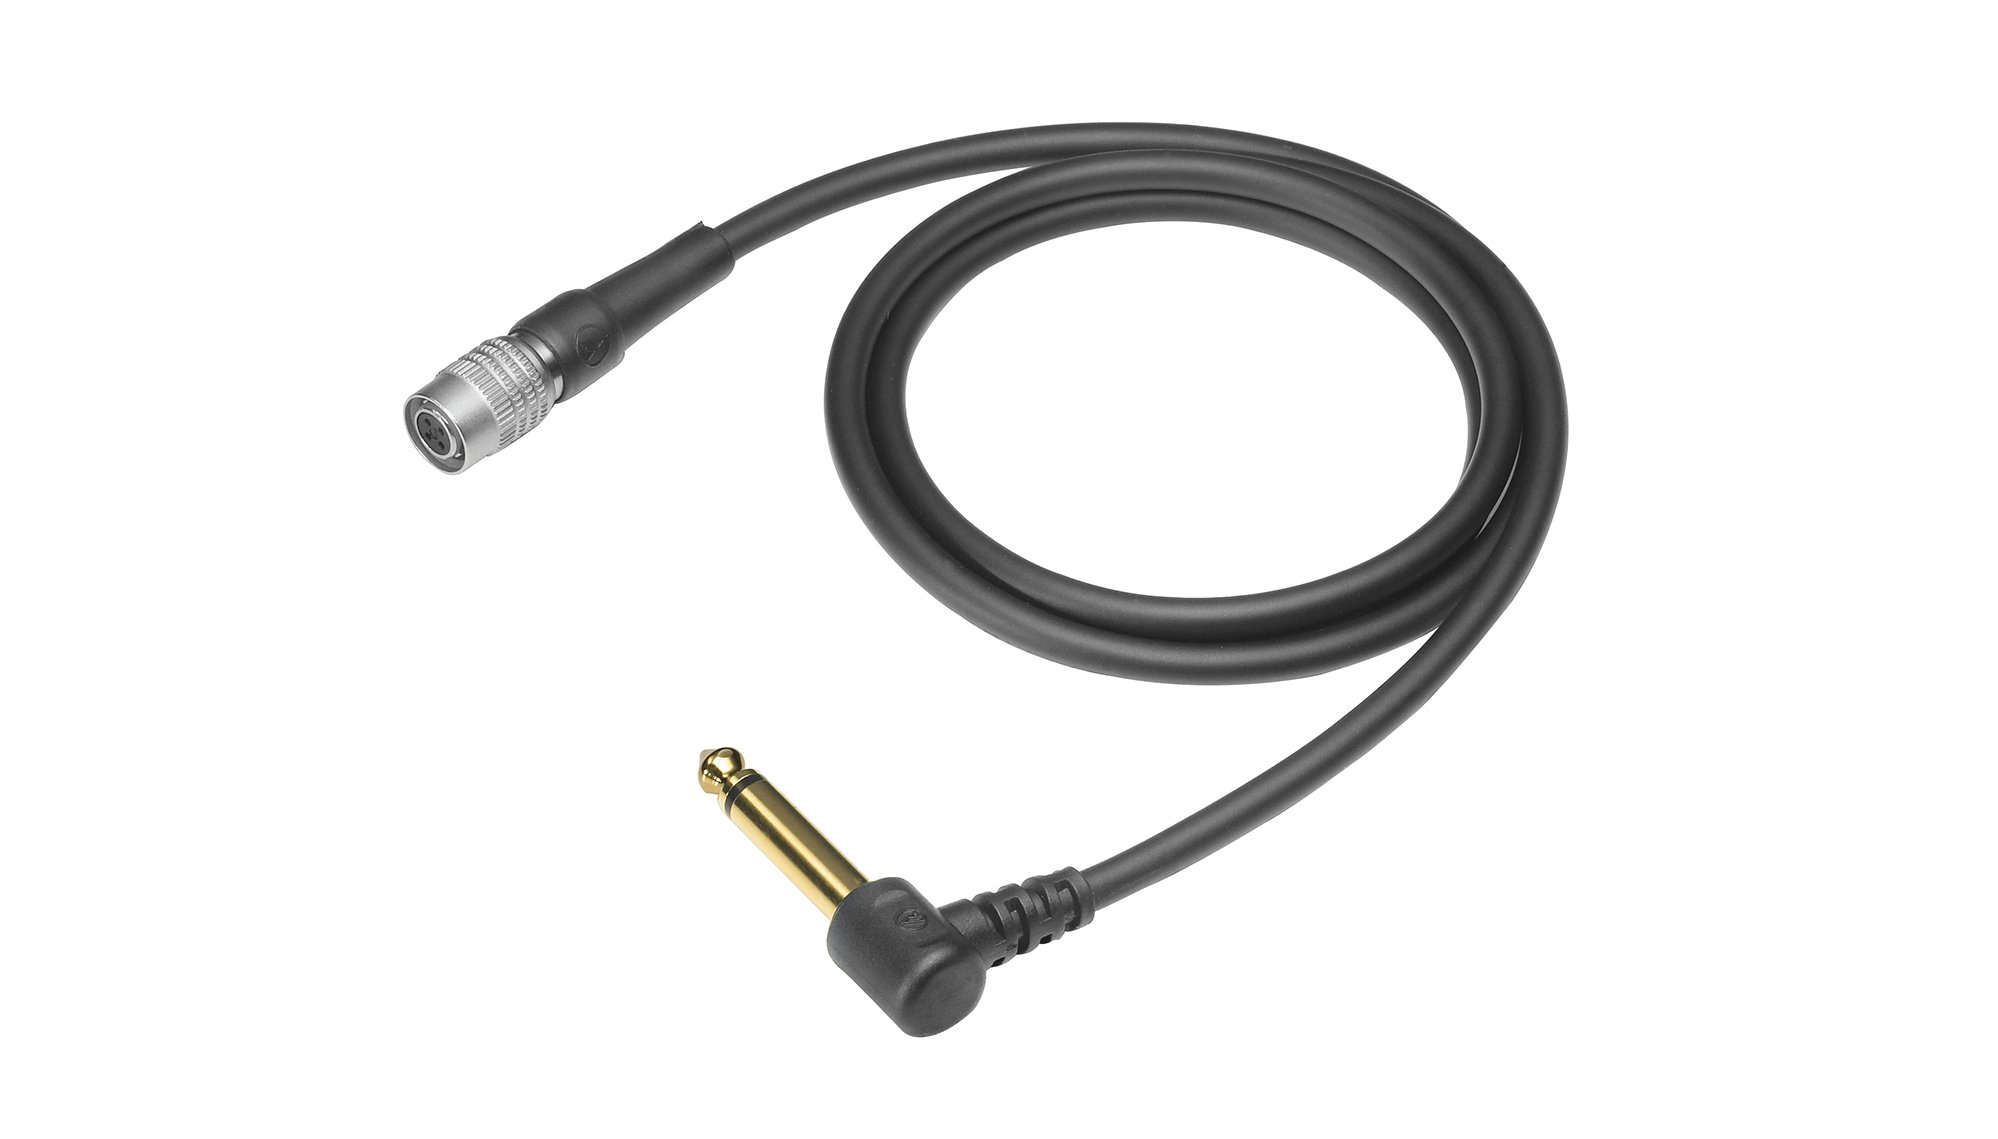 Photos - Cable (video, audio, USB) Audio-Technica AT-GRcW Hi-Z Instrument / Guitar Input Cable for UniPak Wir 